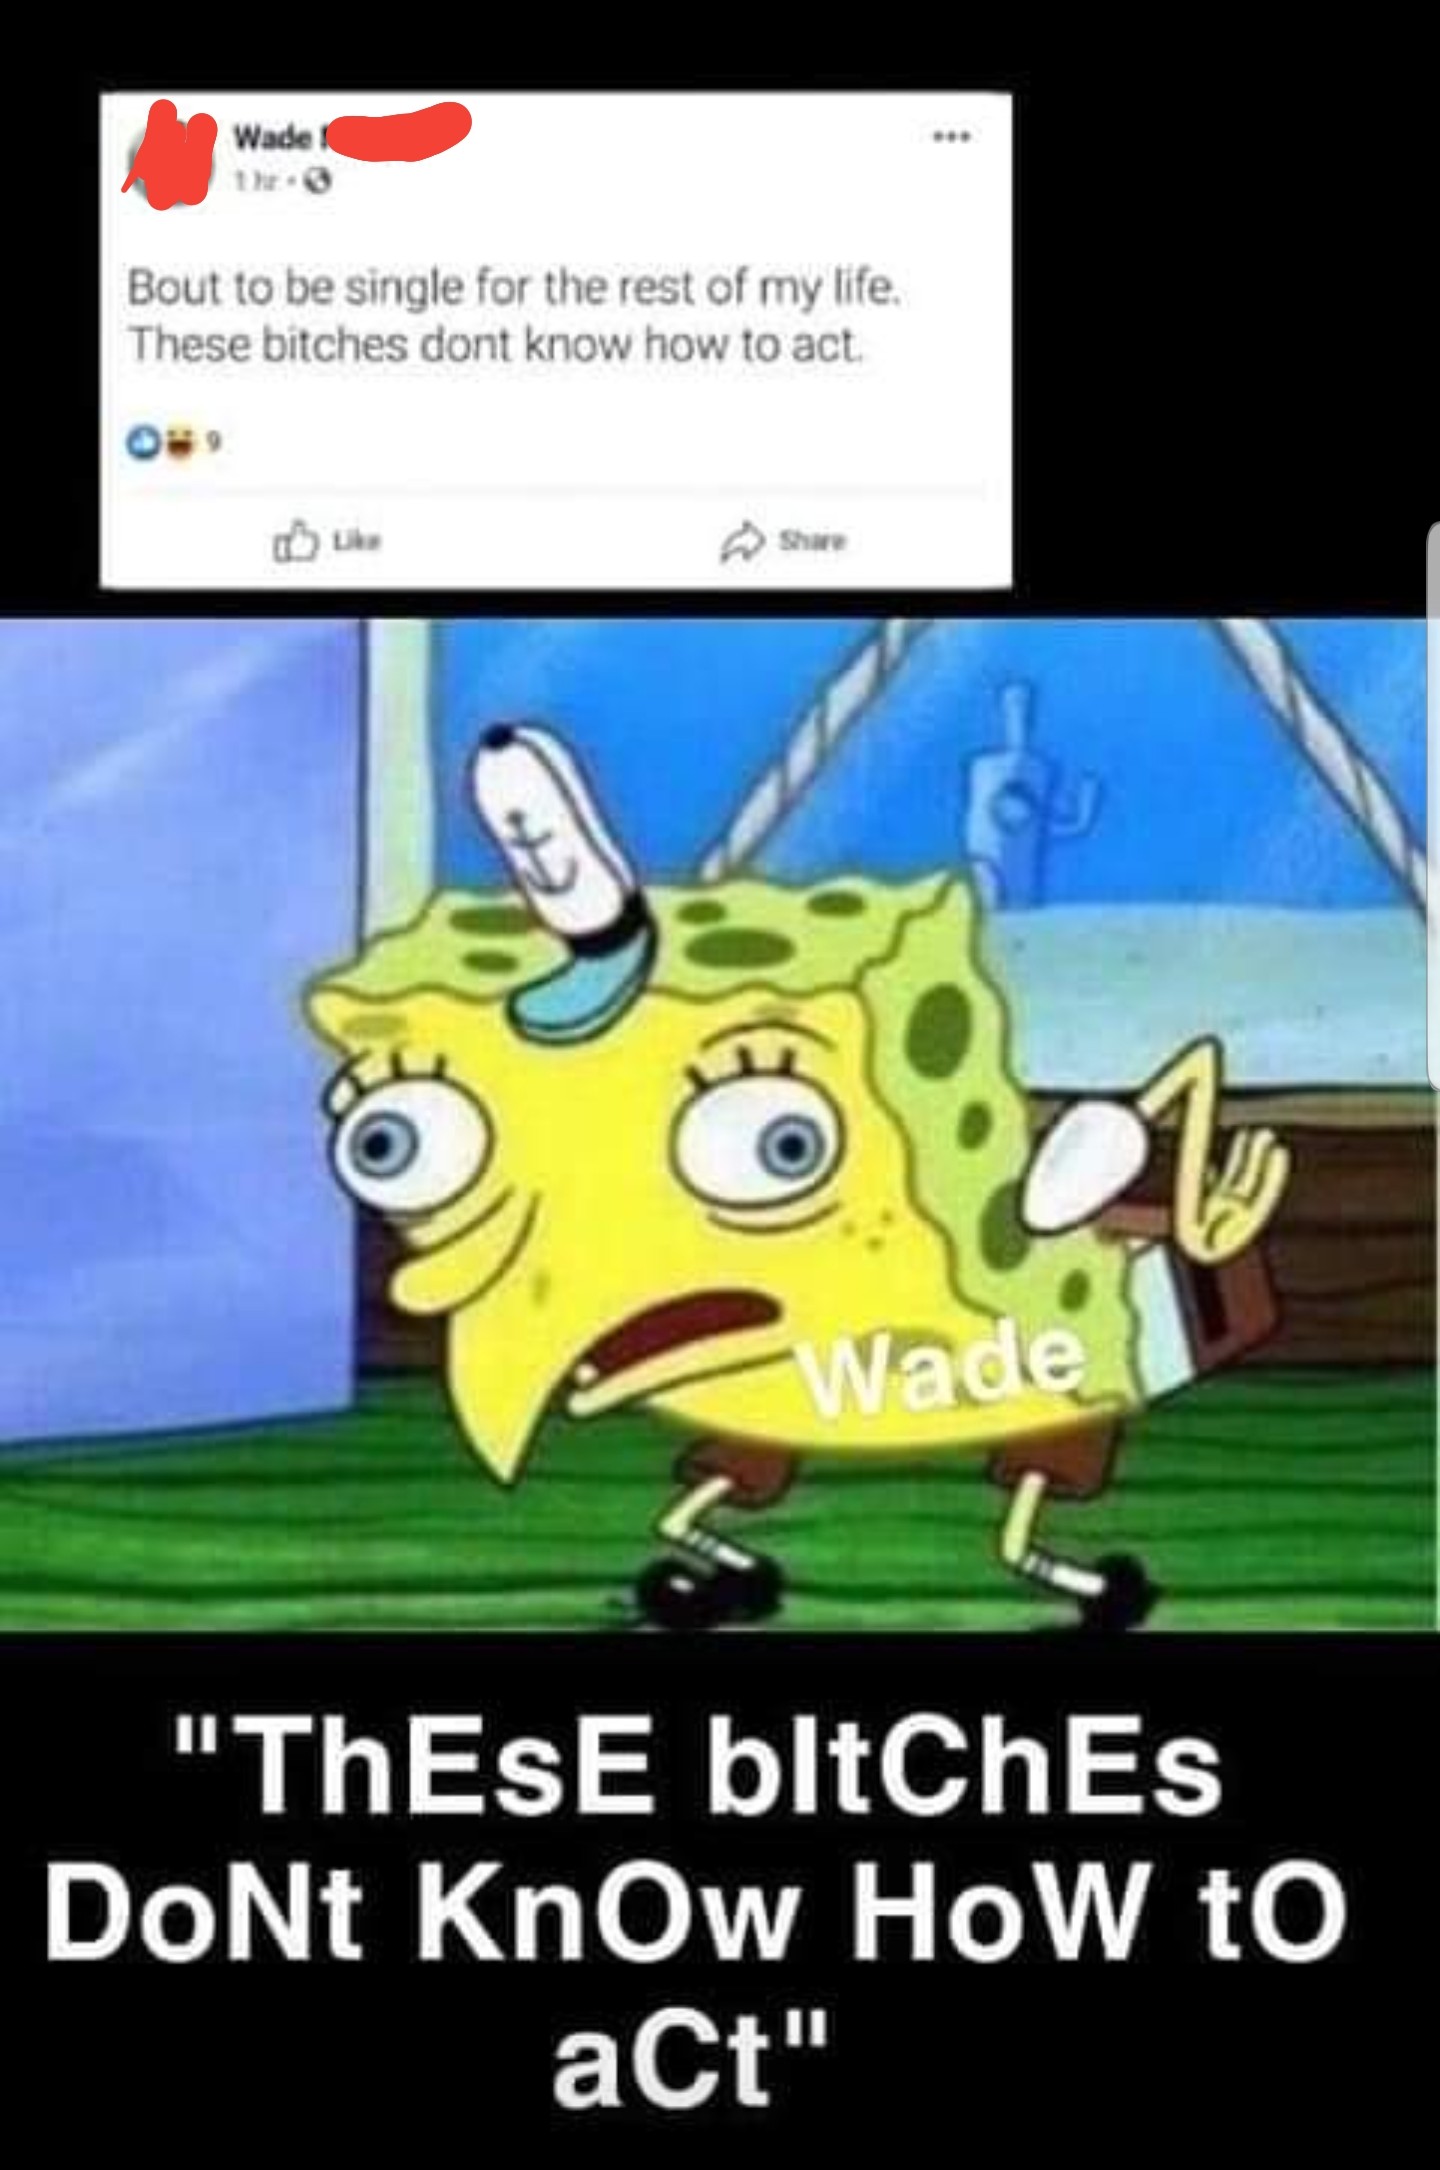 spongebob meme - minecraft is better than fortnite - Wade Bout to be single for the rest of my life. These bitches dont know how to act Wade "ThESE bltches DONt Know How to act"